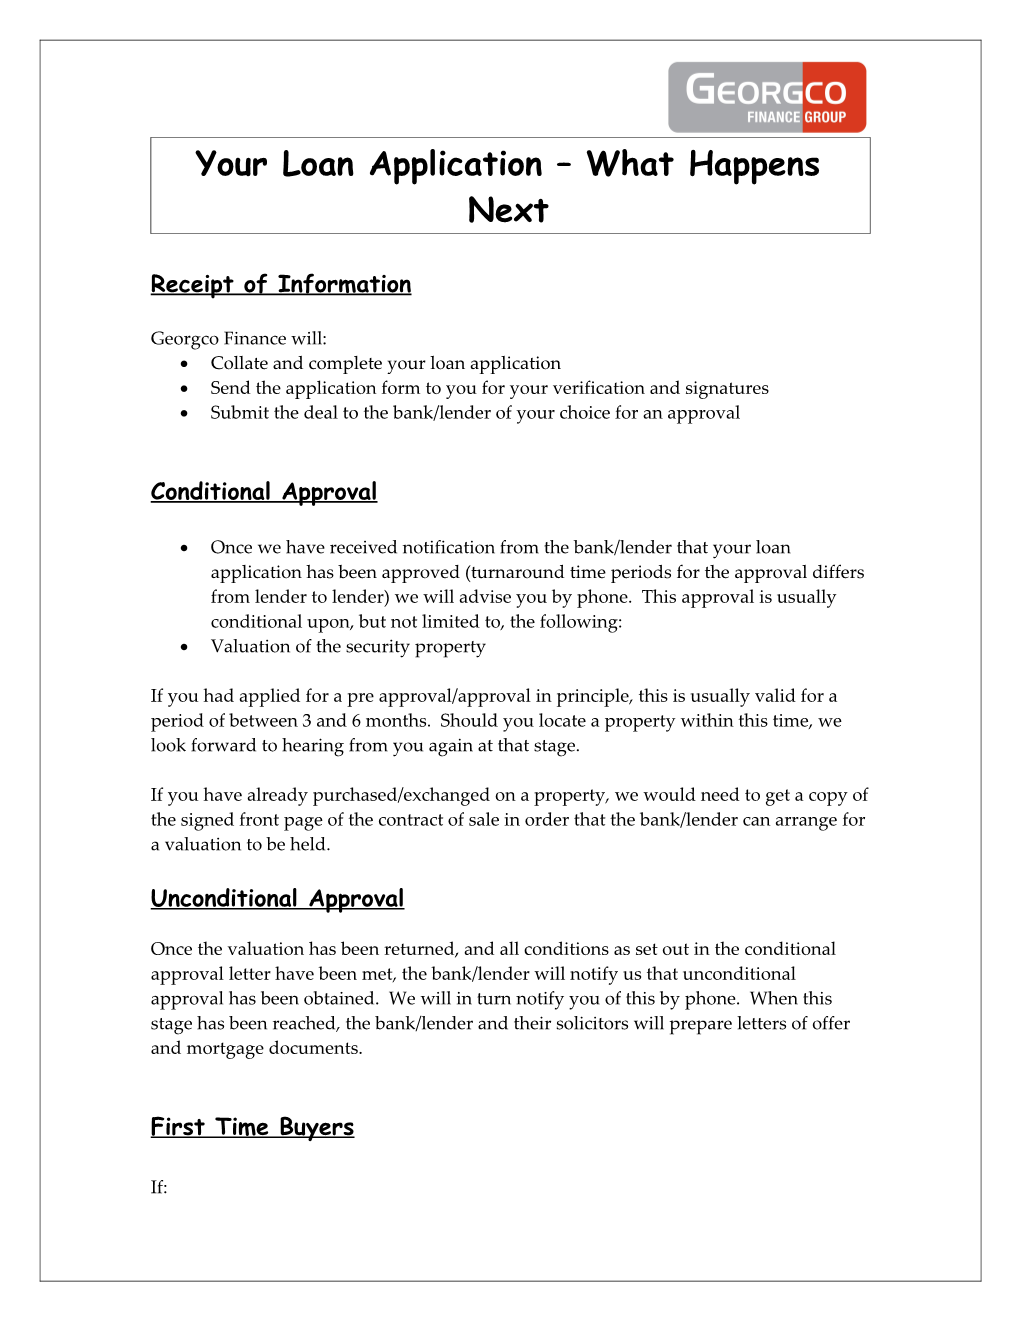 Your Loan Application What Happens Next